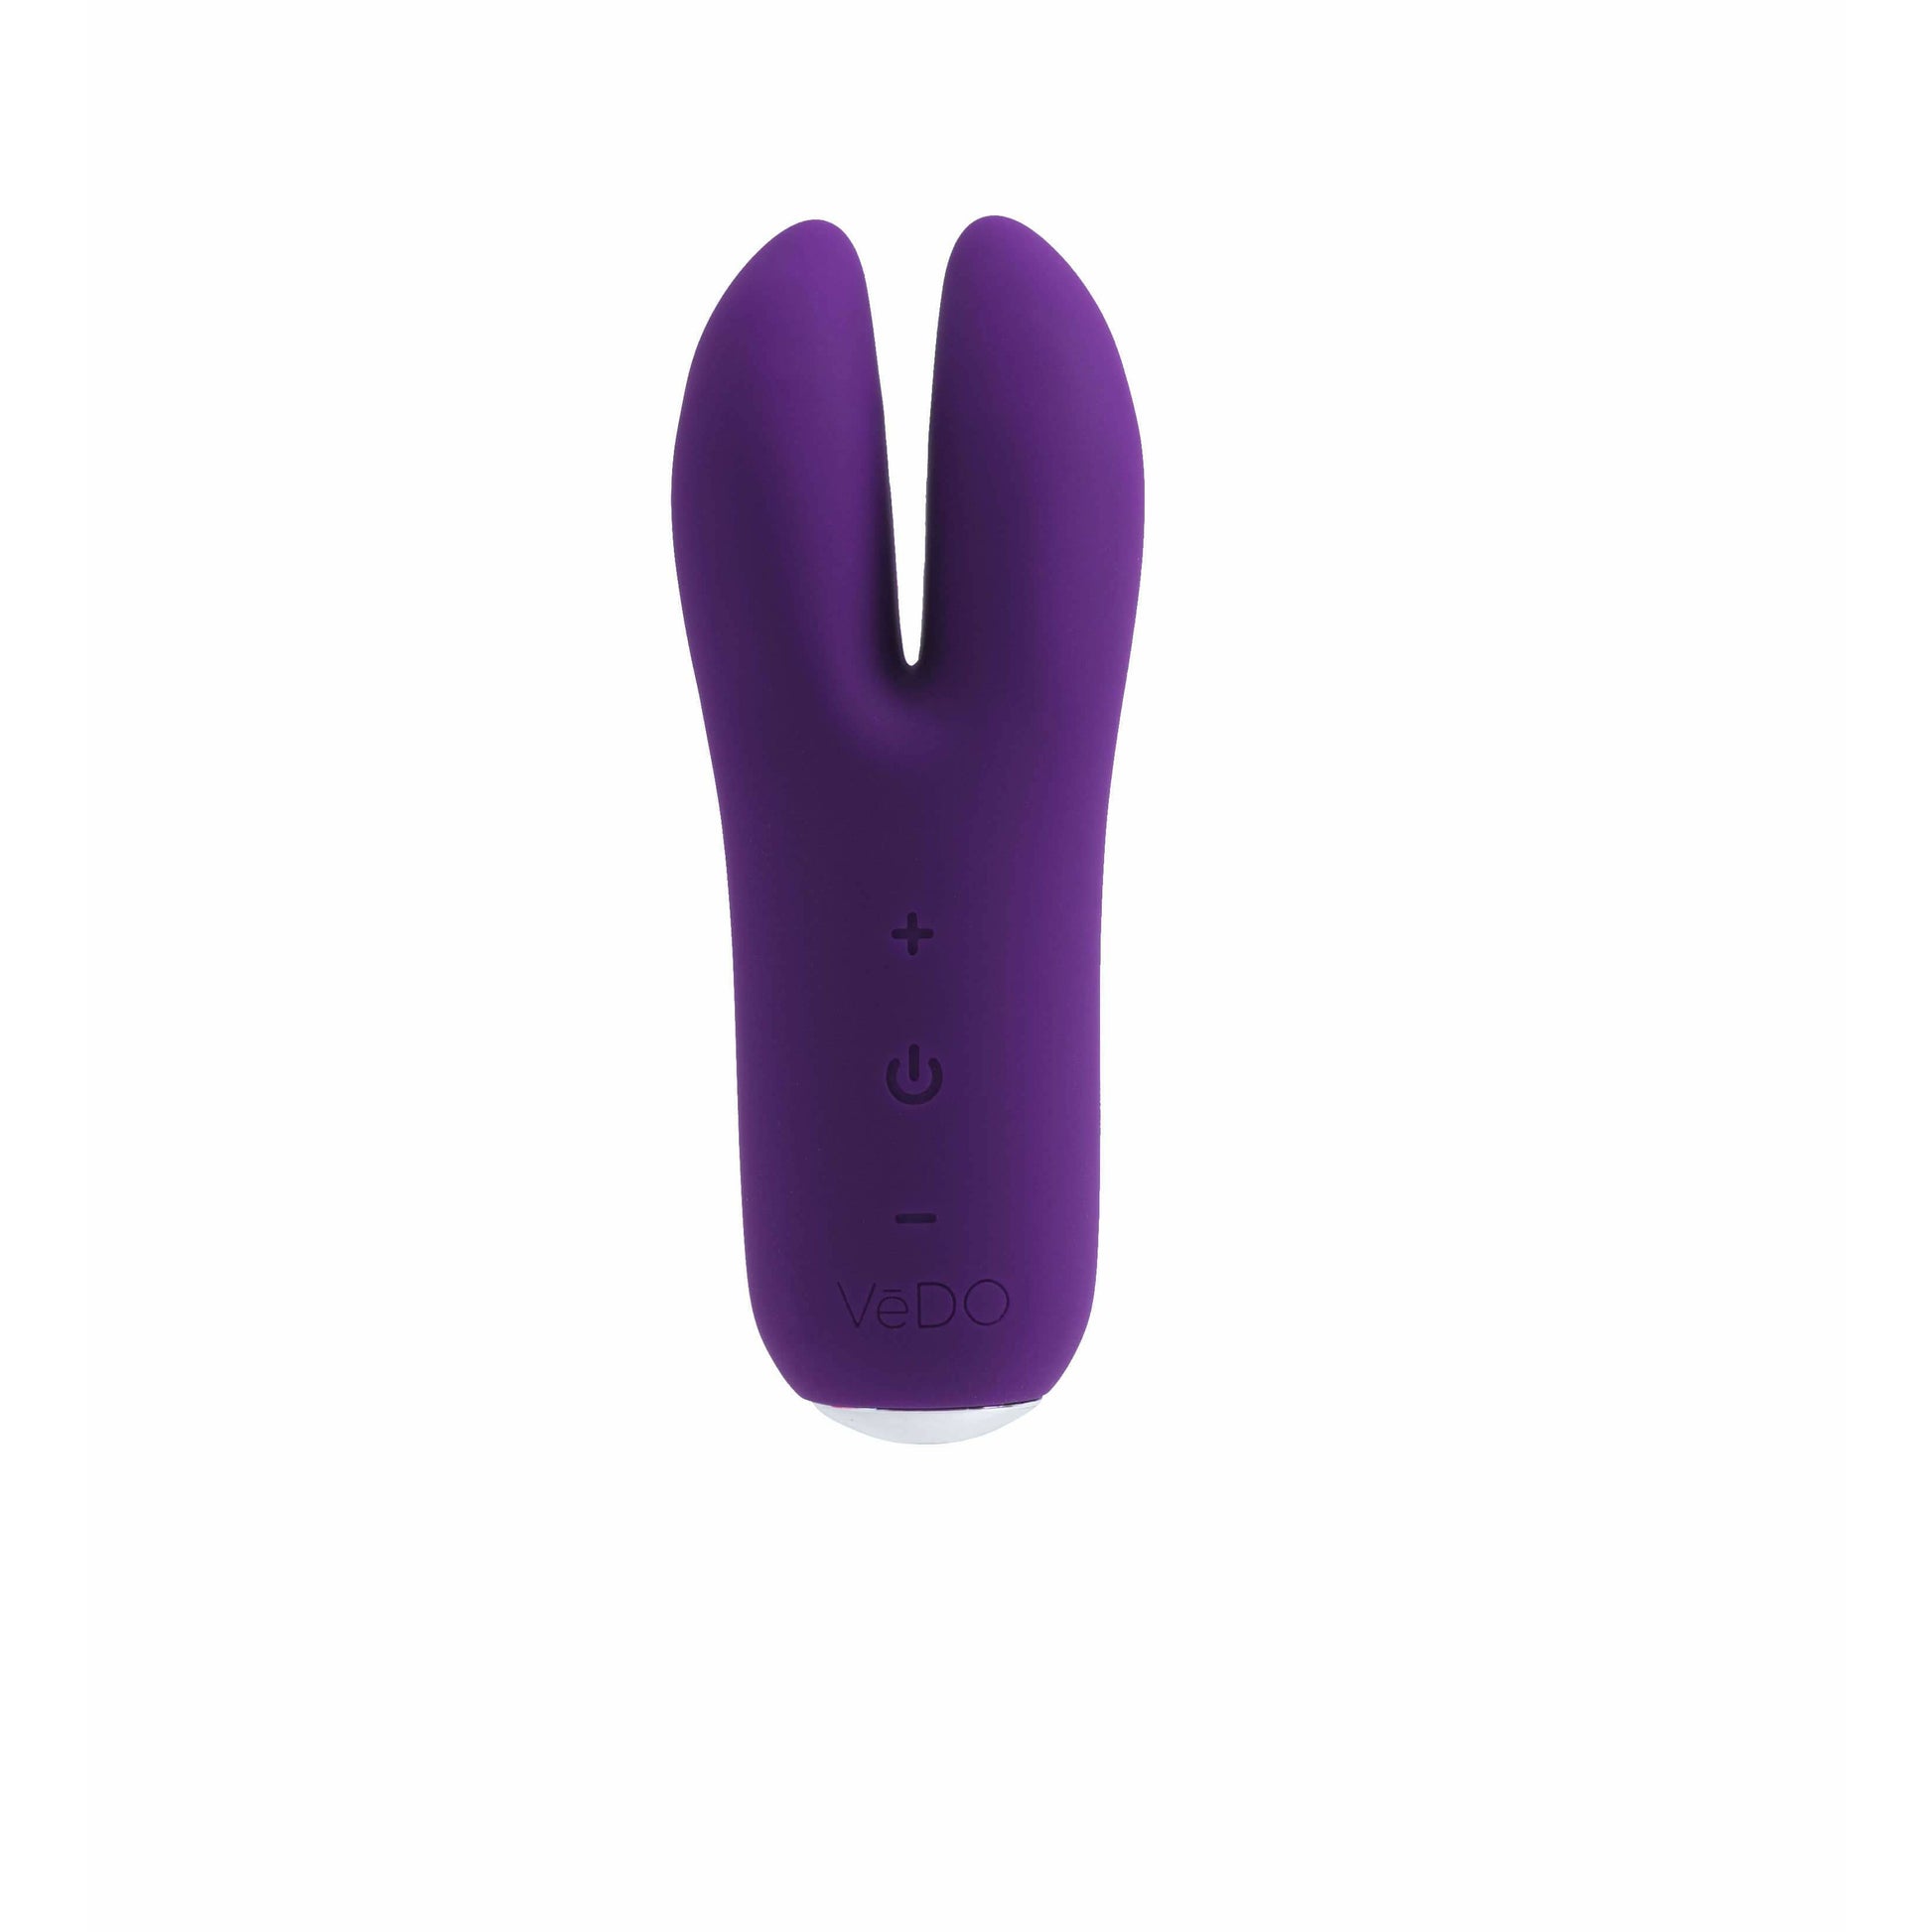 VeDO Kitti in purple - by The Bigger O - an online sex toy shop. We ship to USA, Canada and the UK.